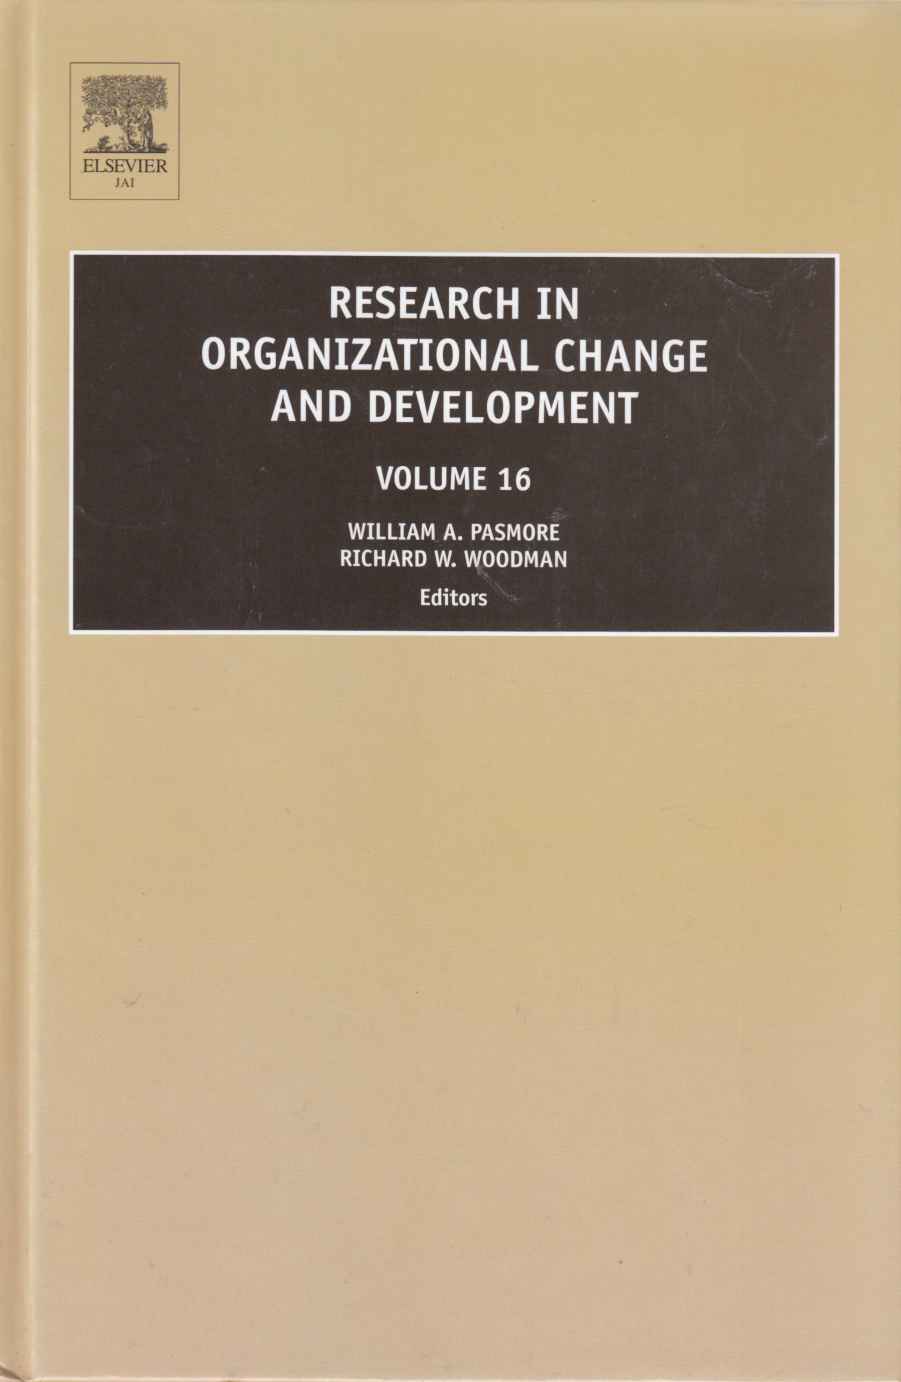 Research in Organizational Change and Development Volume 16 - Pasmore, William A. & Woodman, Richard W. (Eds. )